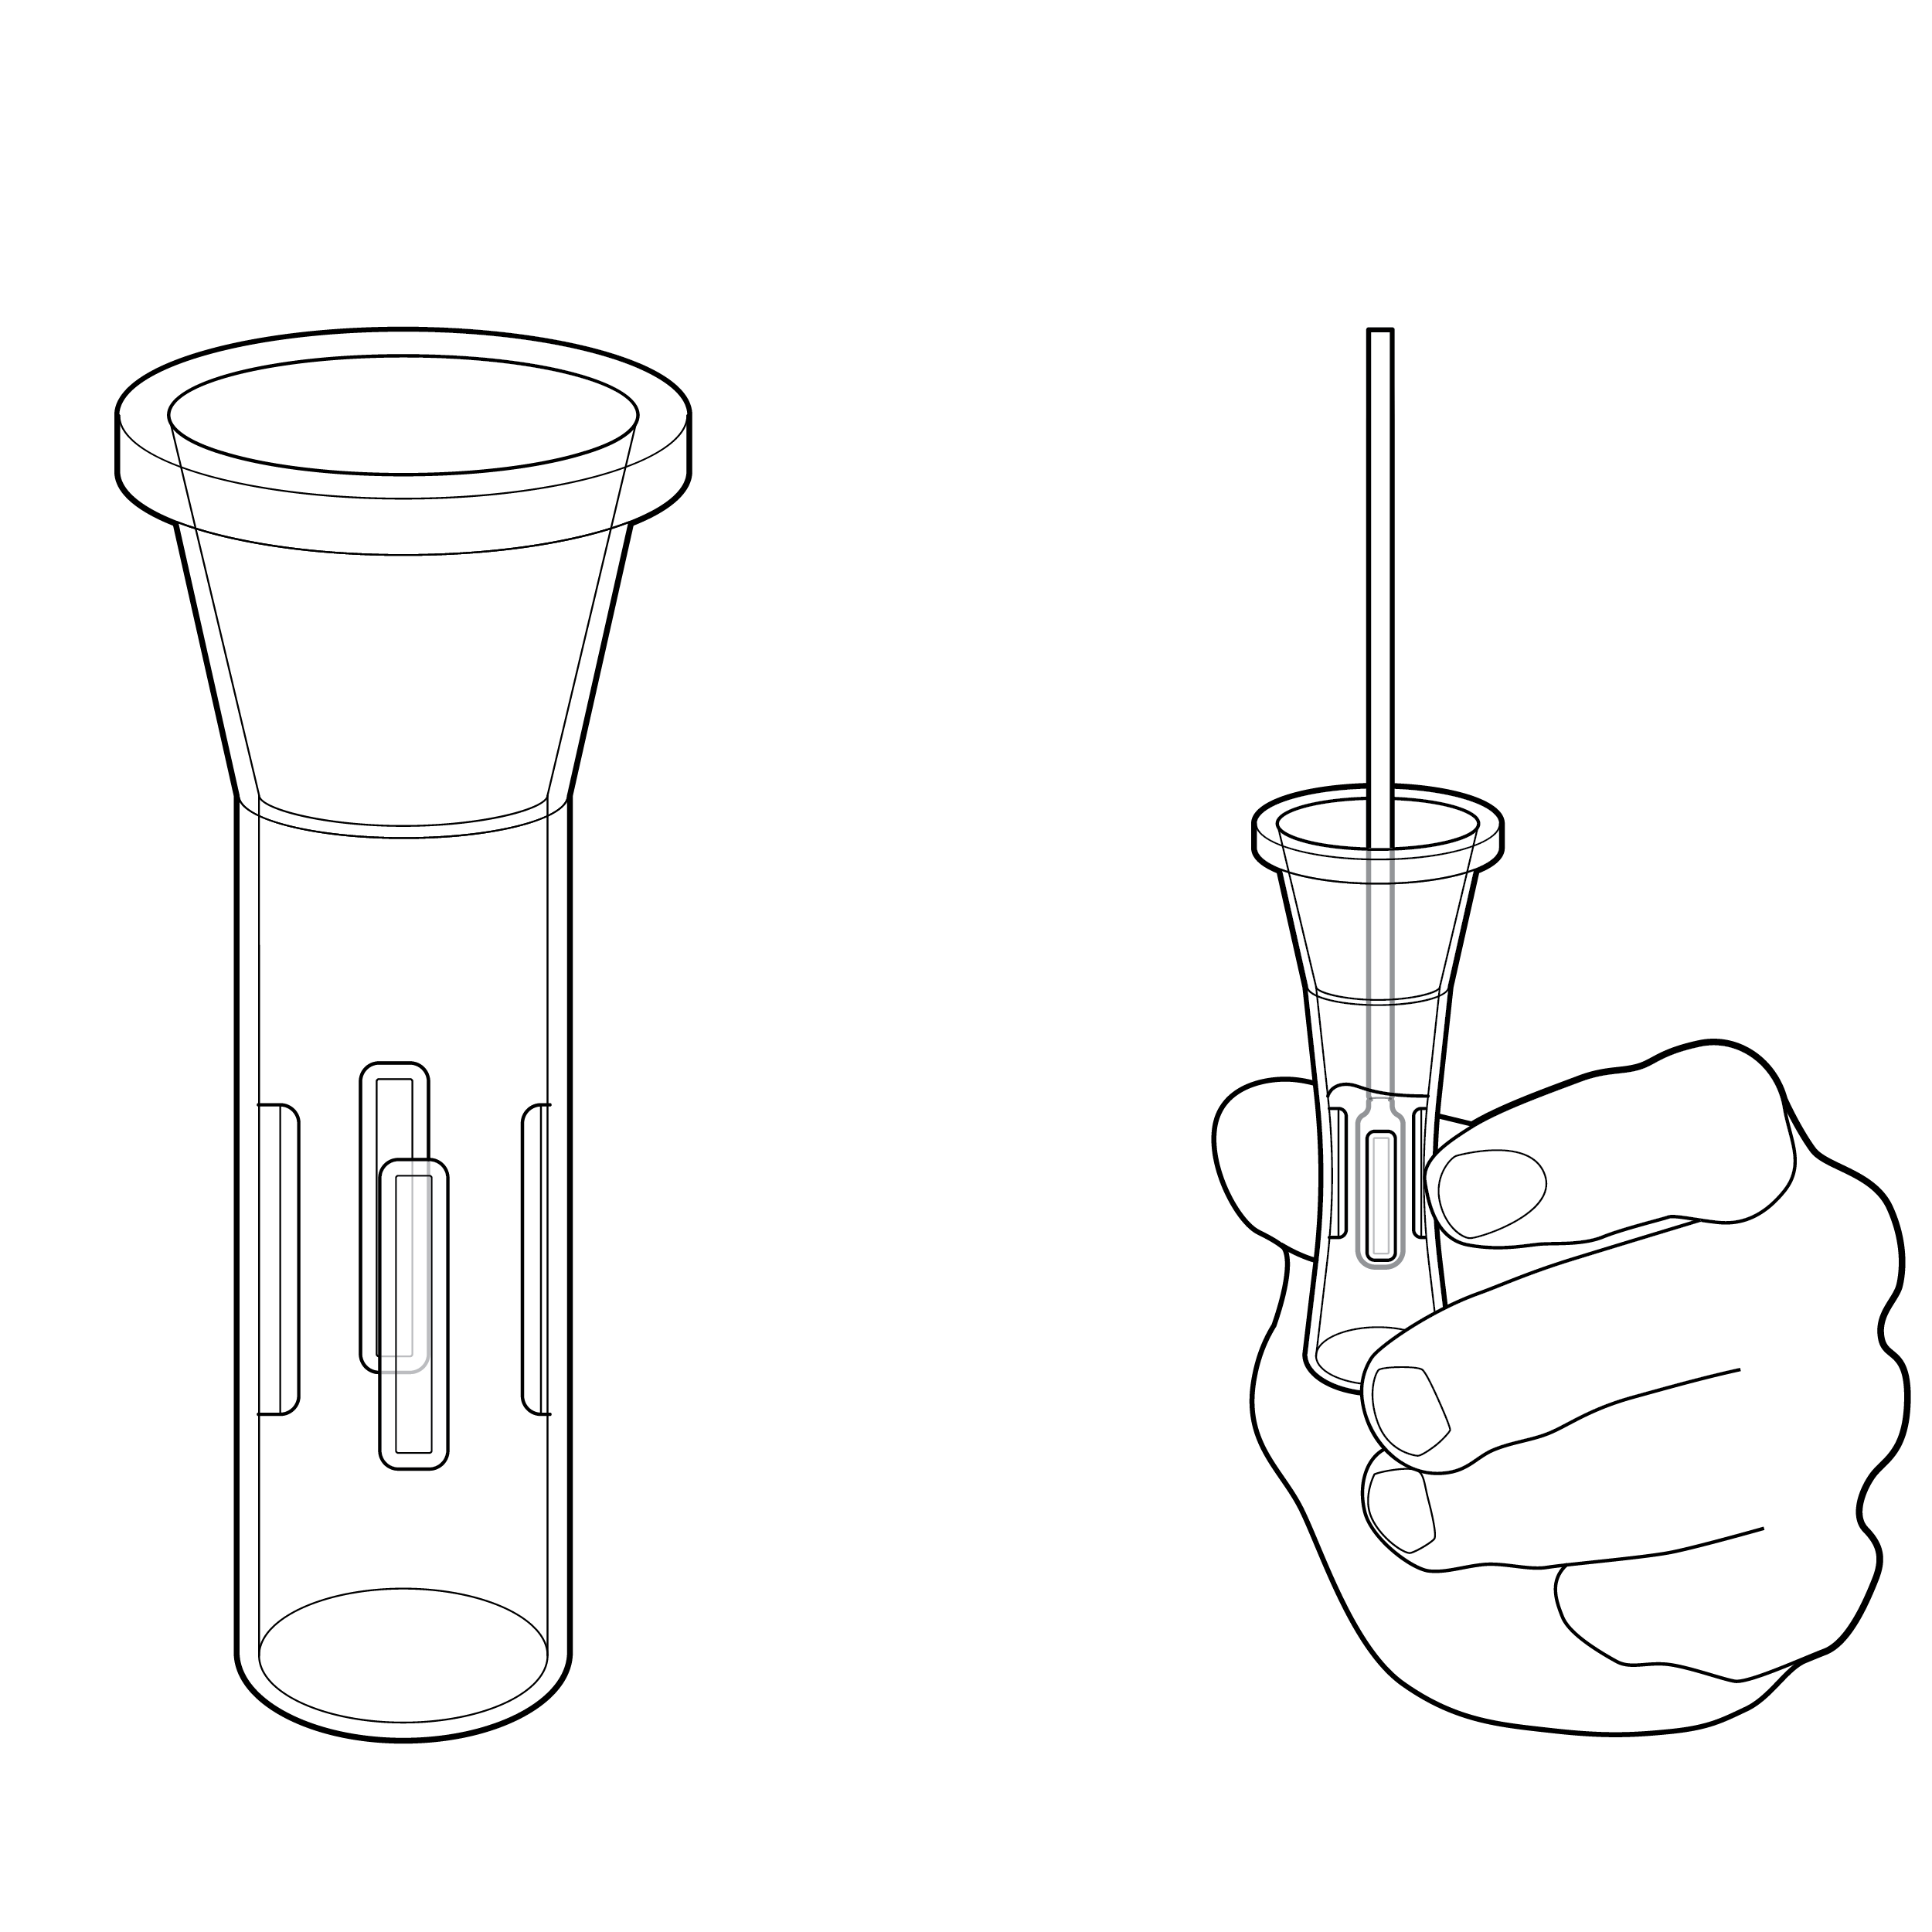 On the left, a fluid vial with a tapered top and rib features on the internal surface. On the right, a hand holding the vial by thumb and forefinger, and a swab inserted into the solution in the vial. 